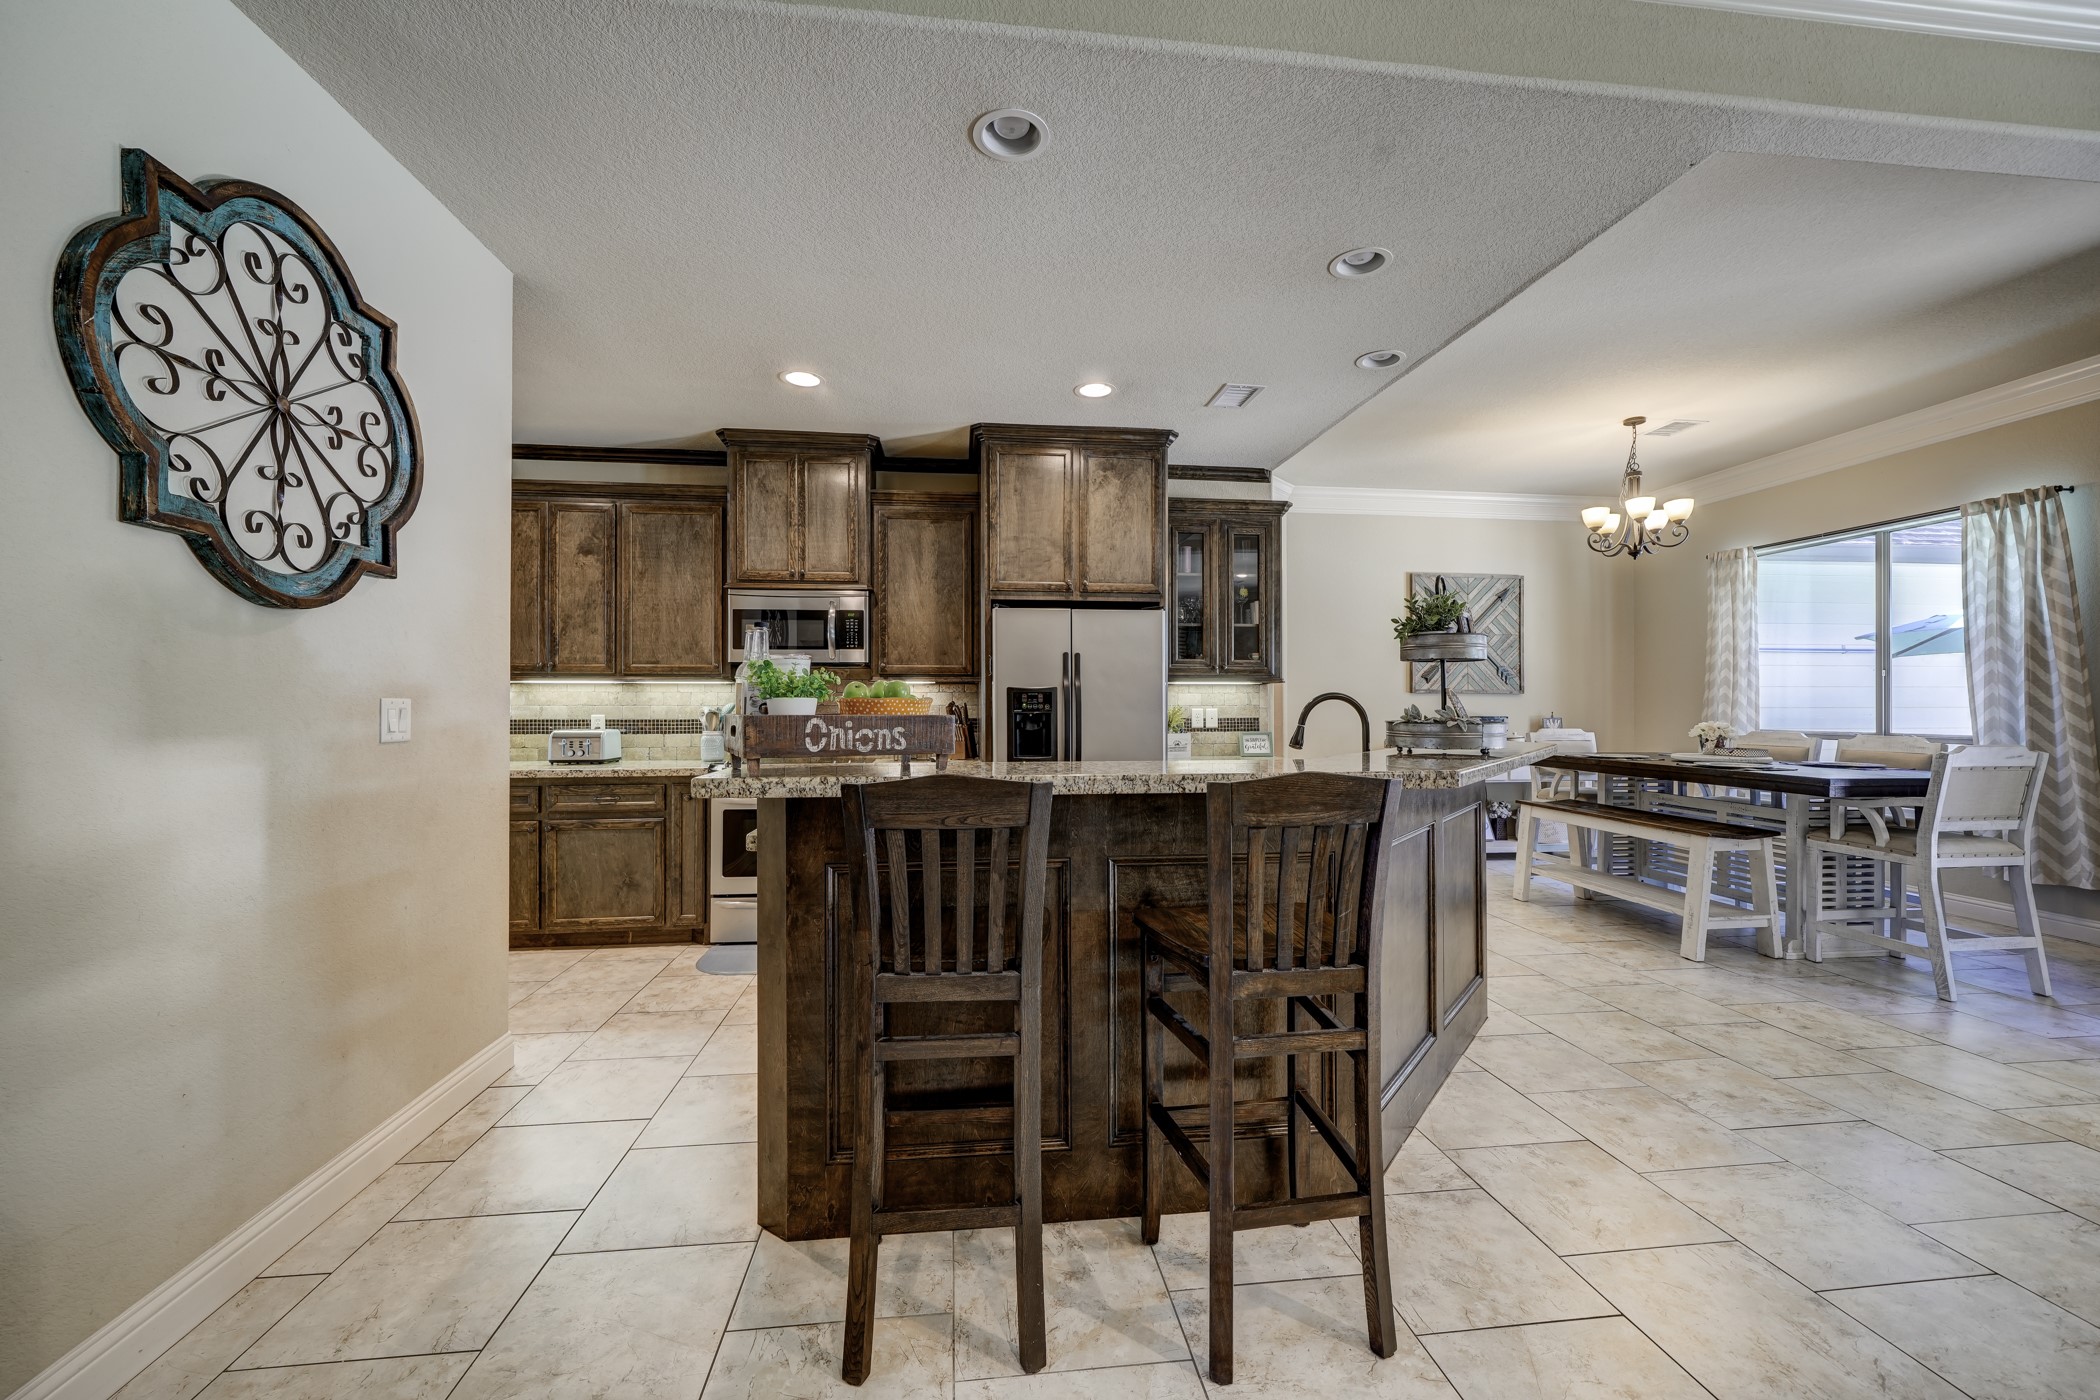 A breakfast bar offers relaxed seating while the nearby dining area provides plenty of space for a larger gathering.